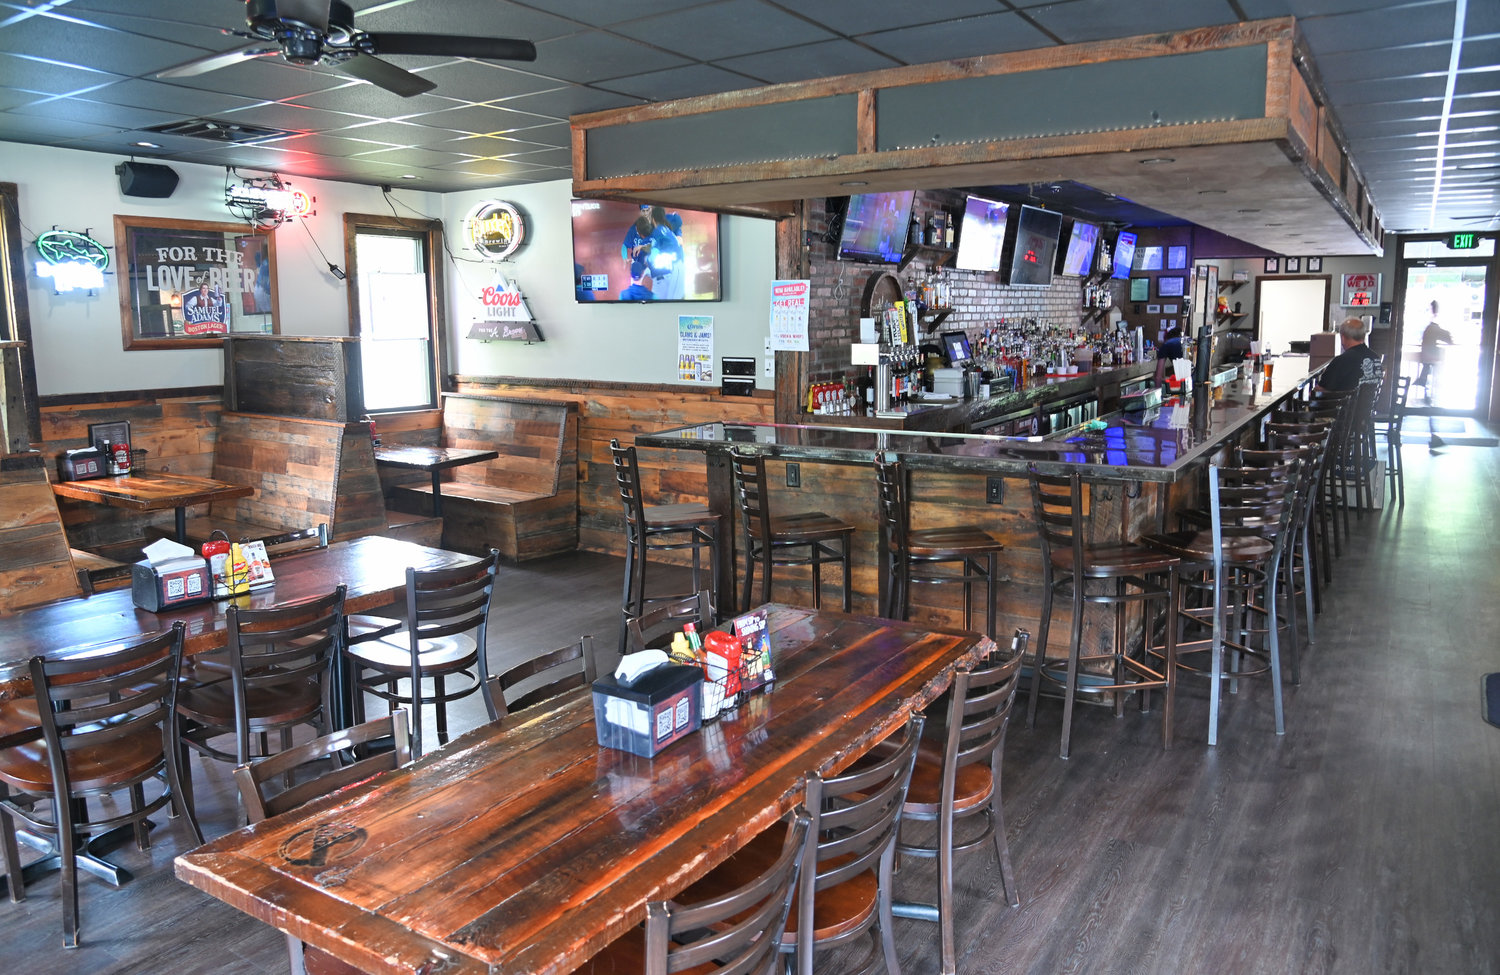 Pictured is the interior of the bar and a portion of the restaurant seating area at the Killabrew Saloon.